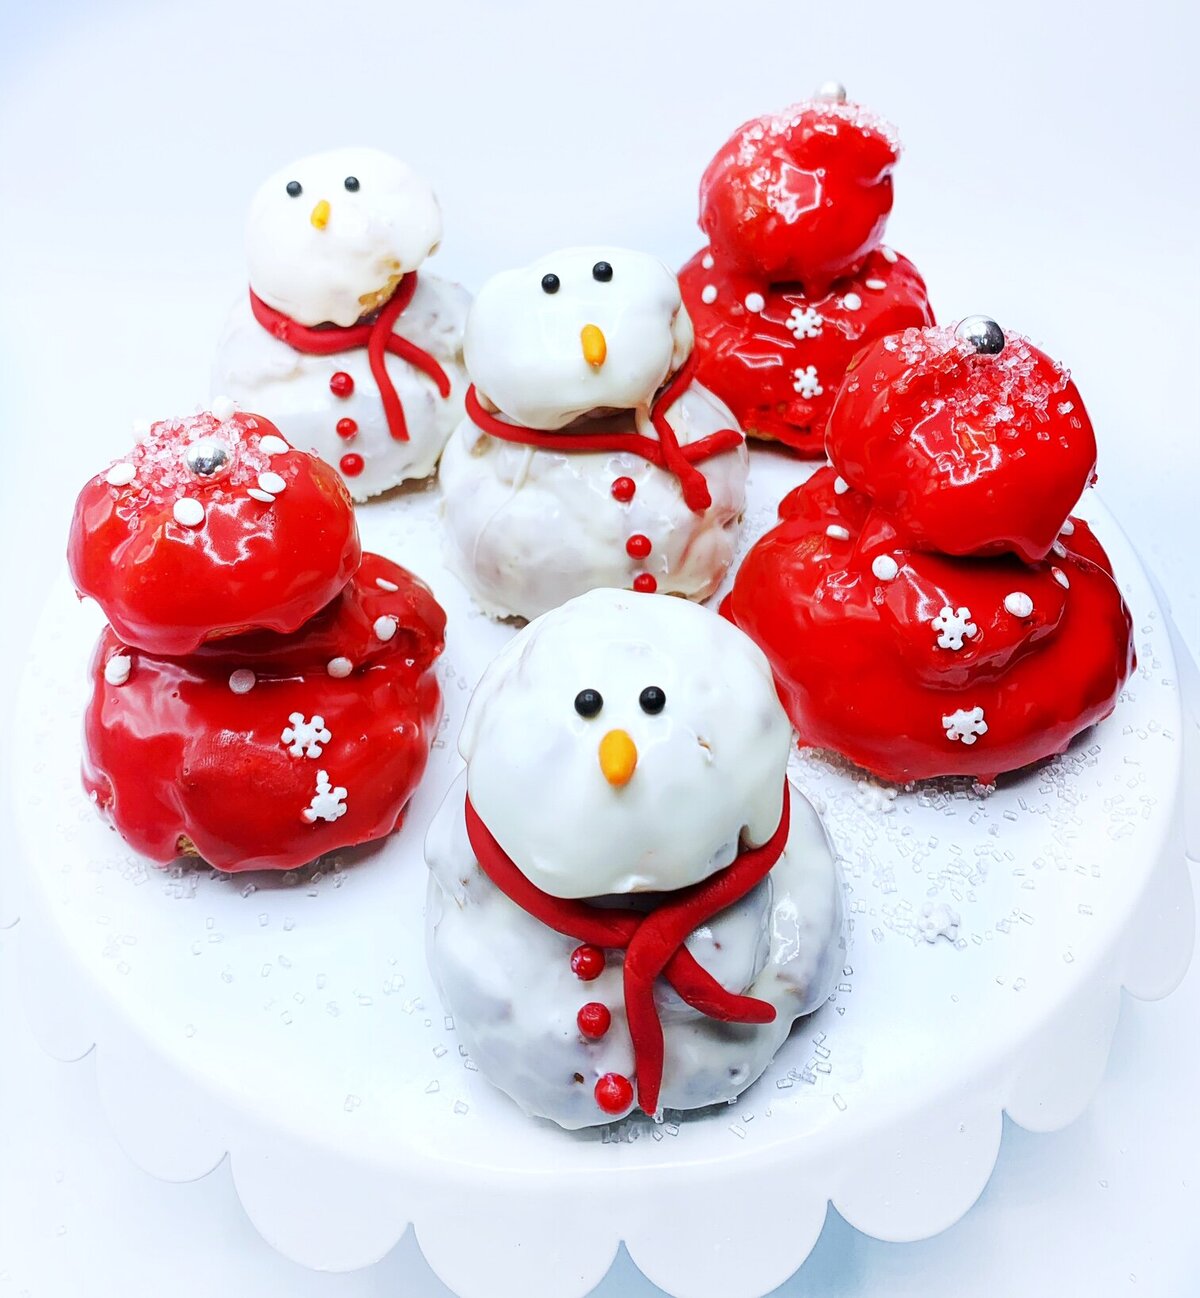 Religieuse cream puffs decorated as snowmen and red and white snowflakes